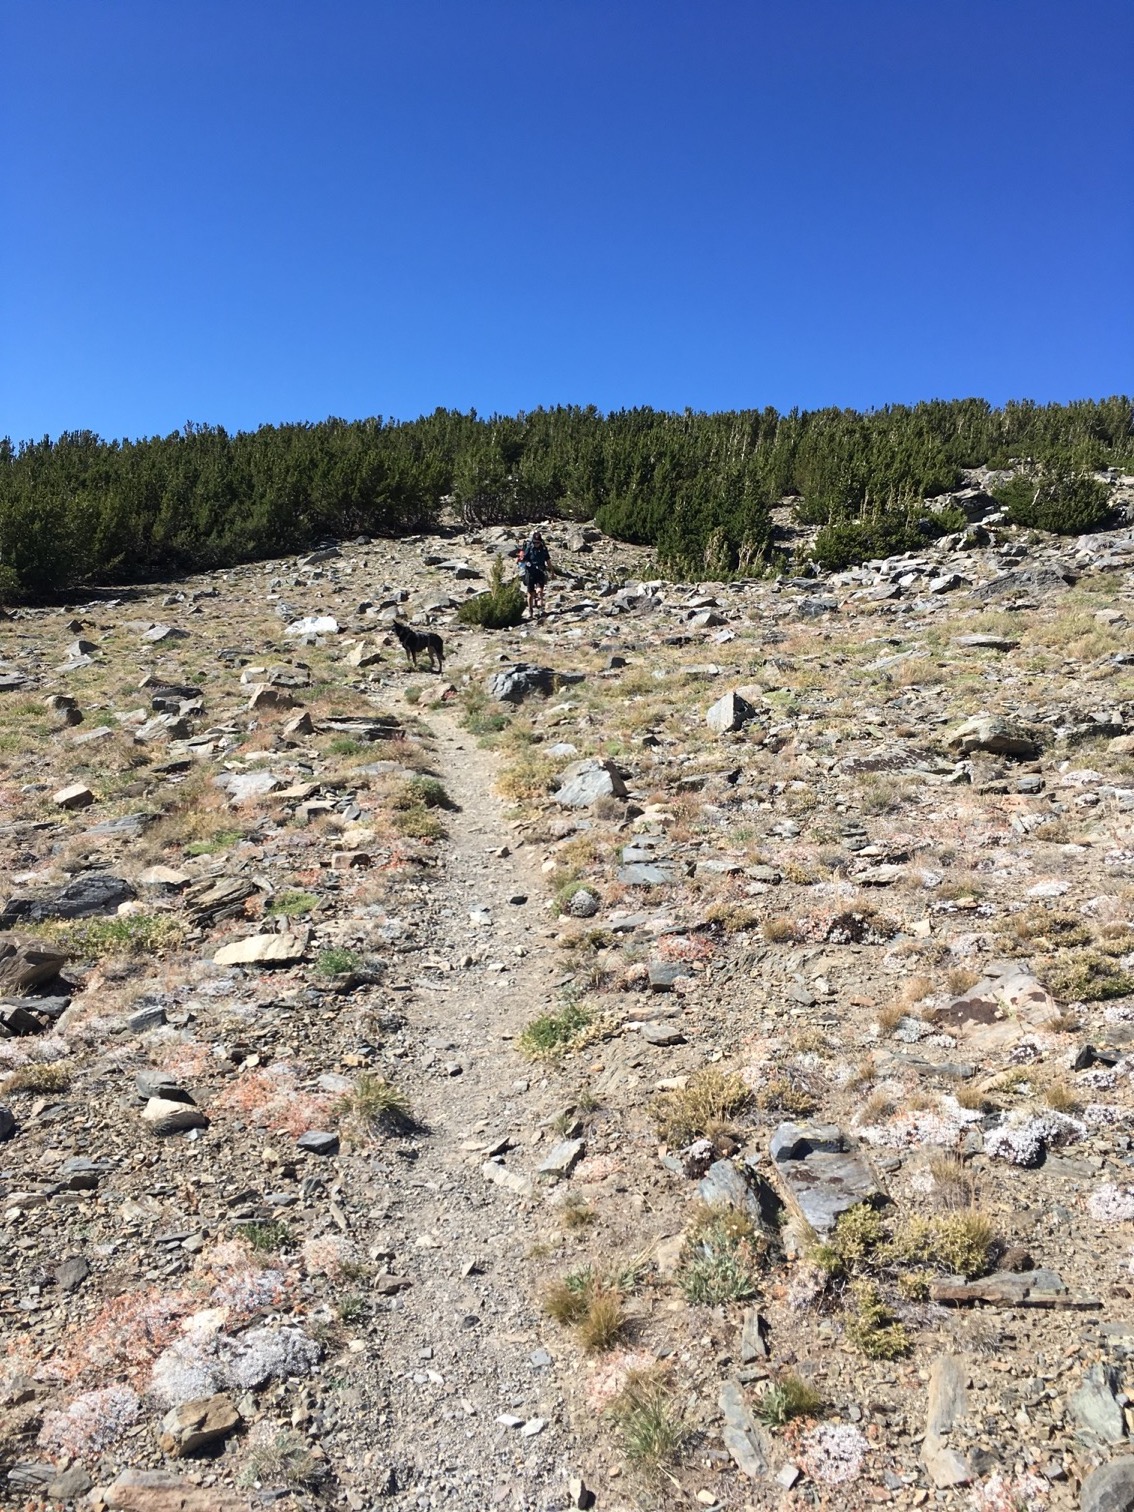 Connecting to Rim Trail